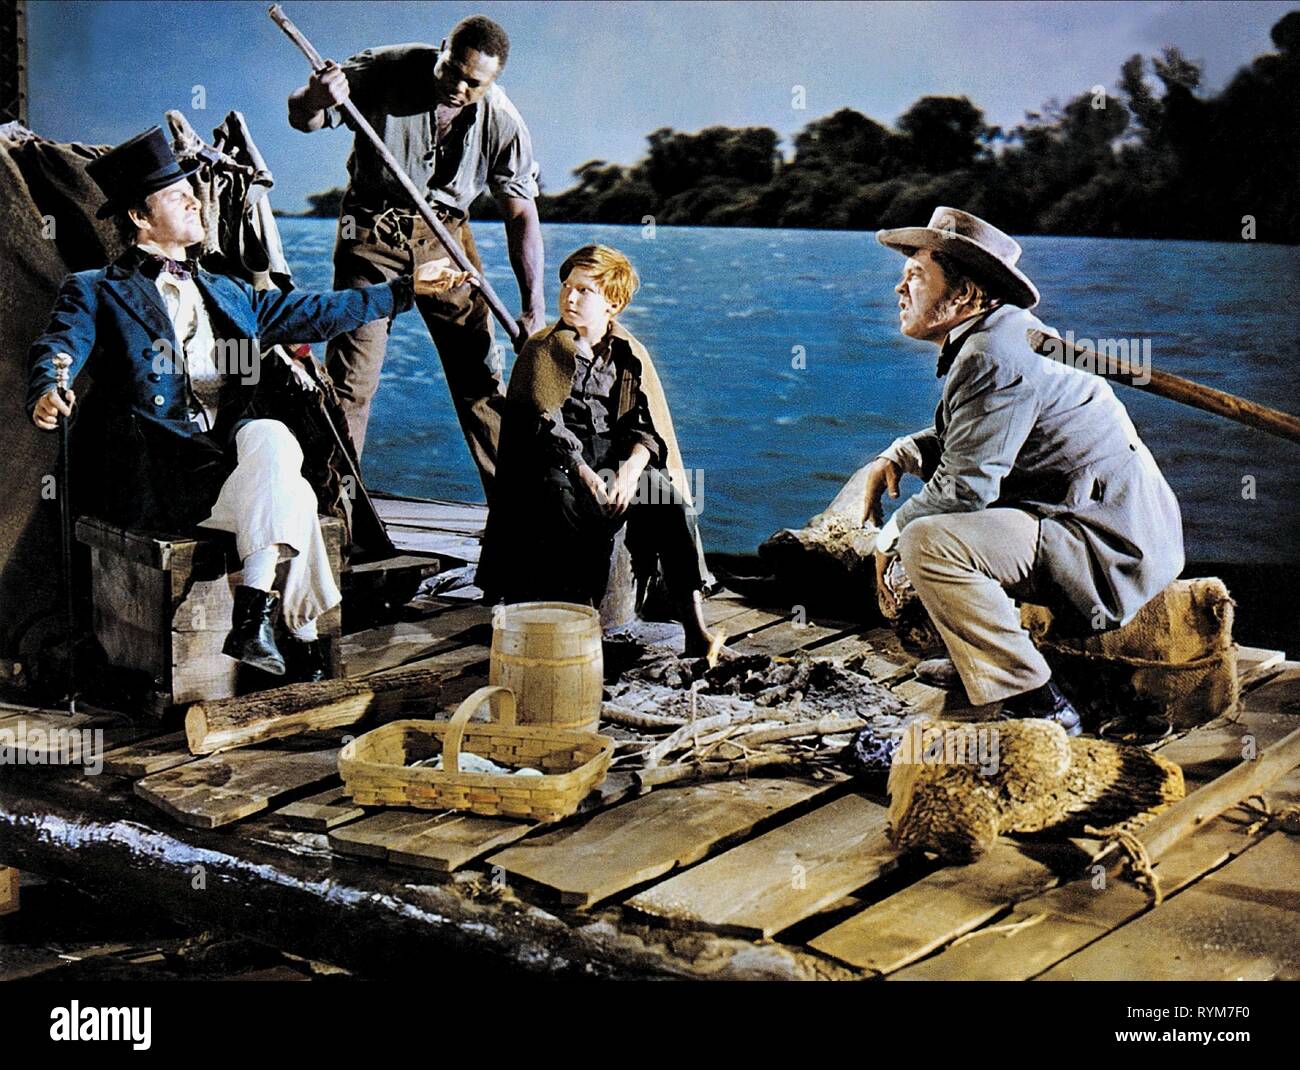 RANDALL,MOORE,HODGES,SHAUGHNESSY, THE ADVENTURES OF HUCKLEBERRY FINN, 1960 Stock Photo